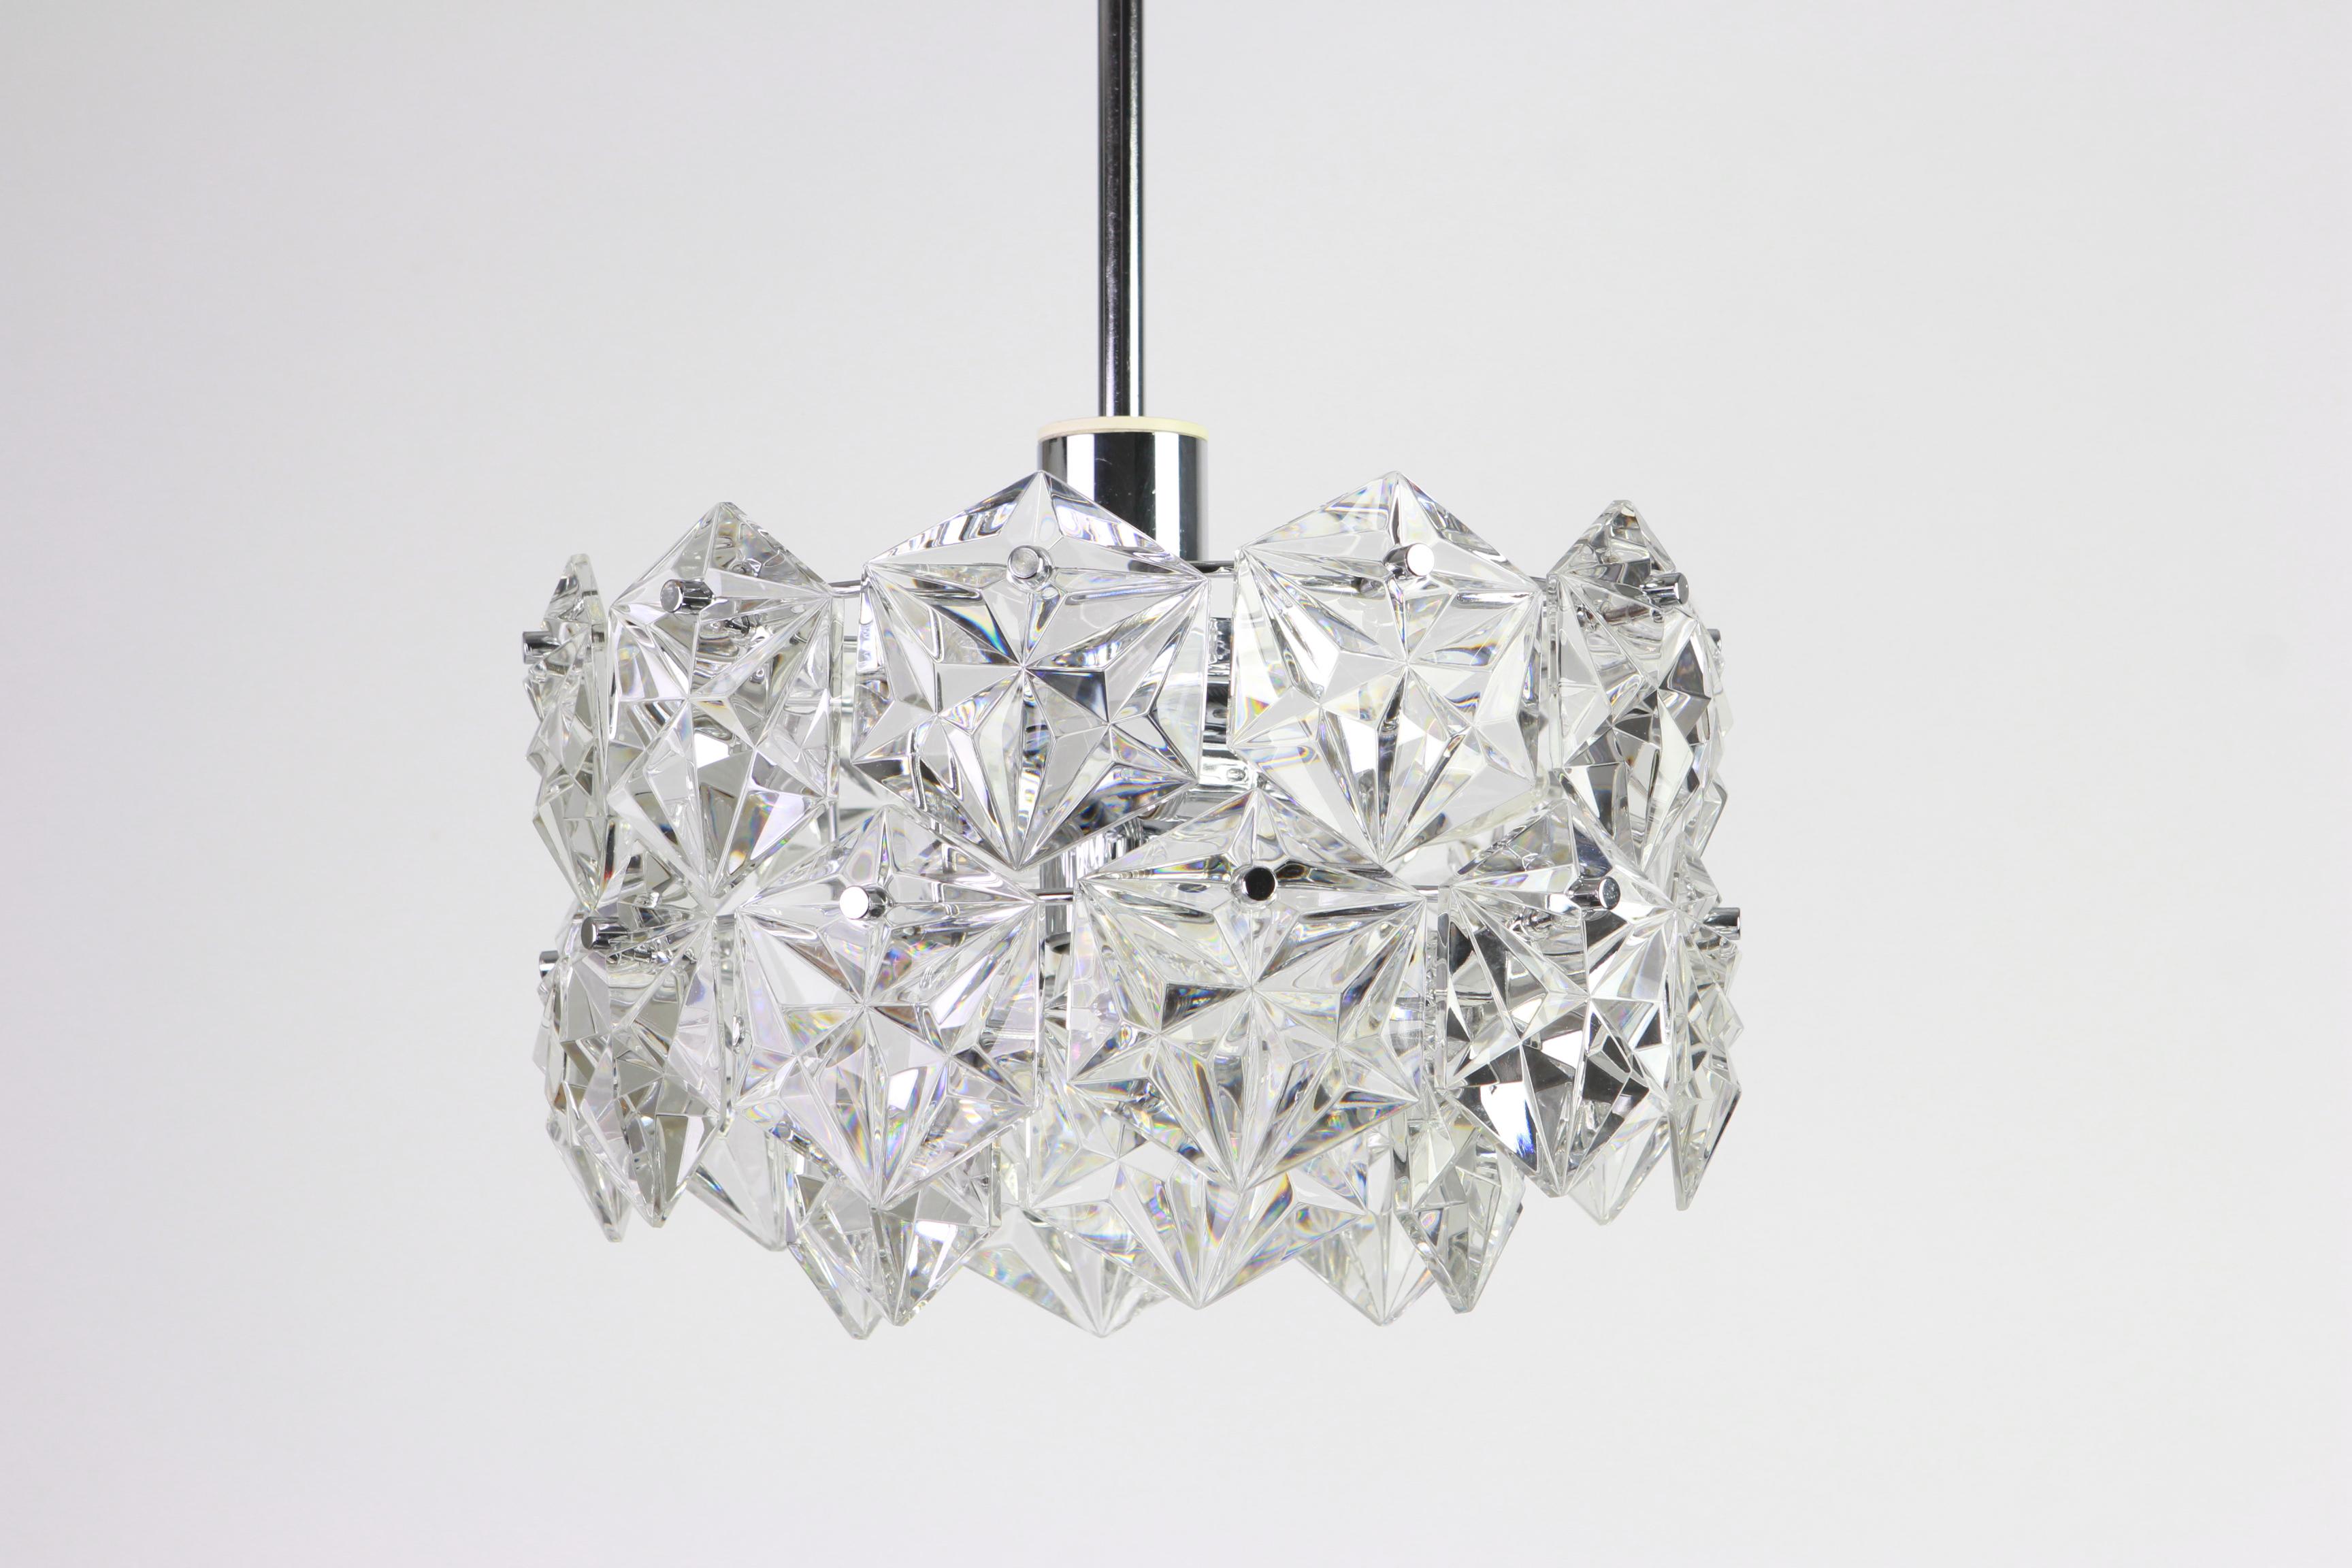 Late 20th Century 1 of 2 Stunning Chandelier, Chrome and Crystal Glass by Kinkeldey, Germany, 1970